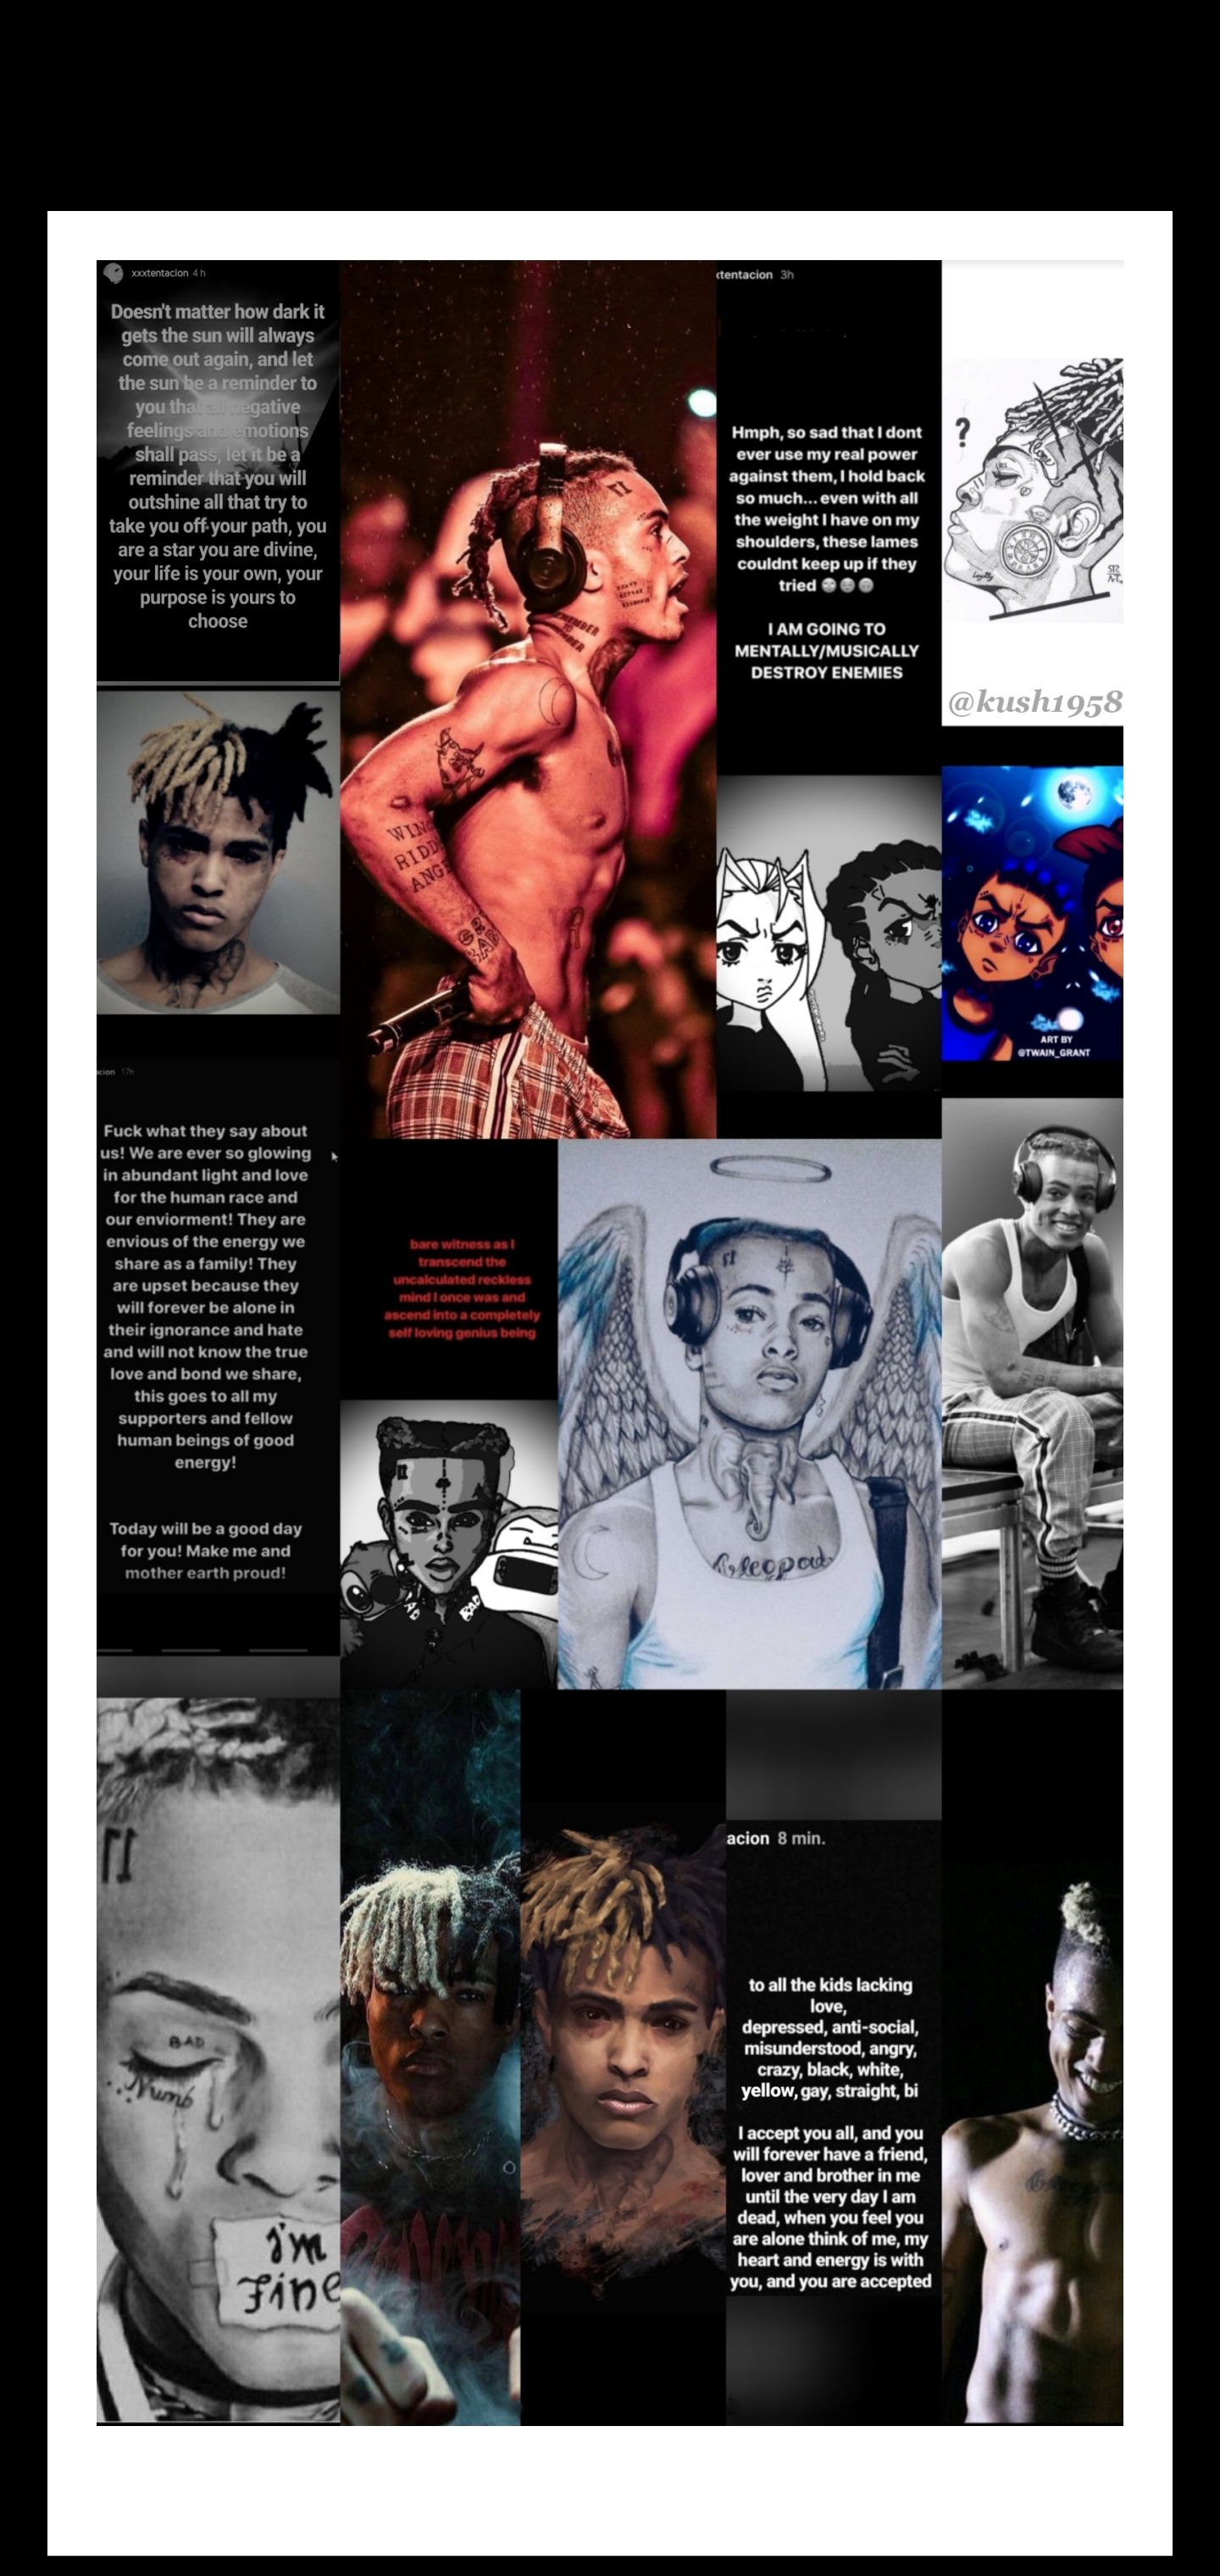 So i made a wallpaper collage of photo of X along with some of his quotes too i thought id share it with you guys